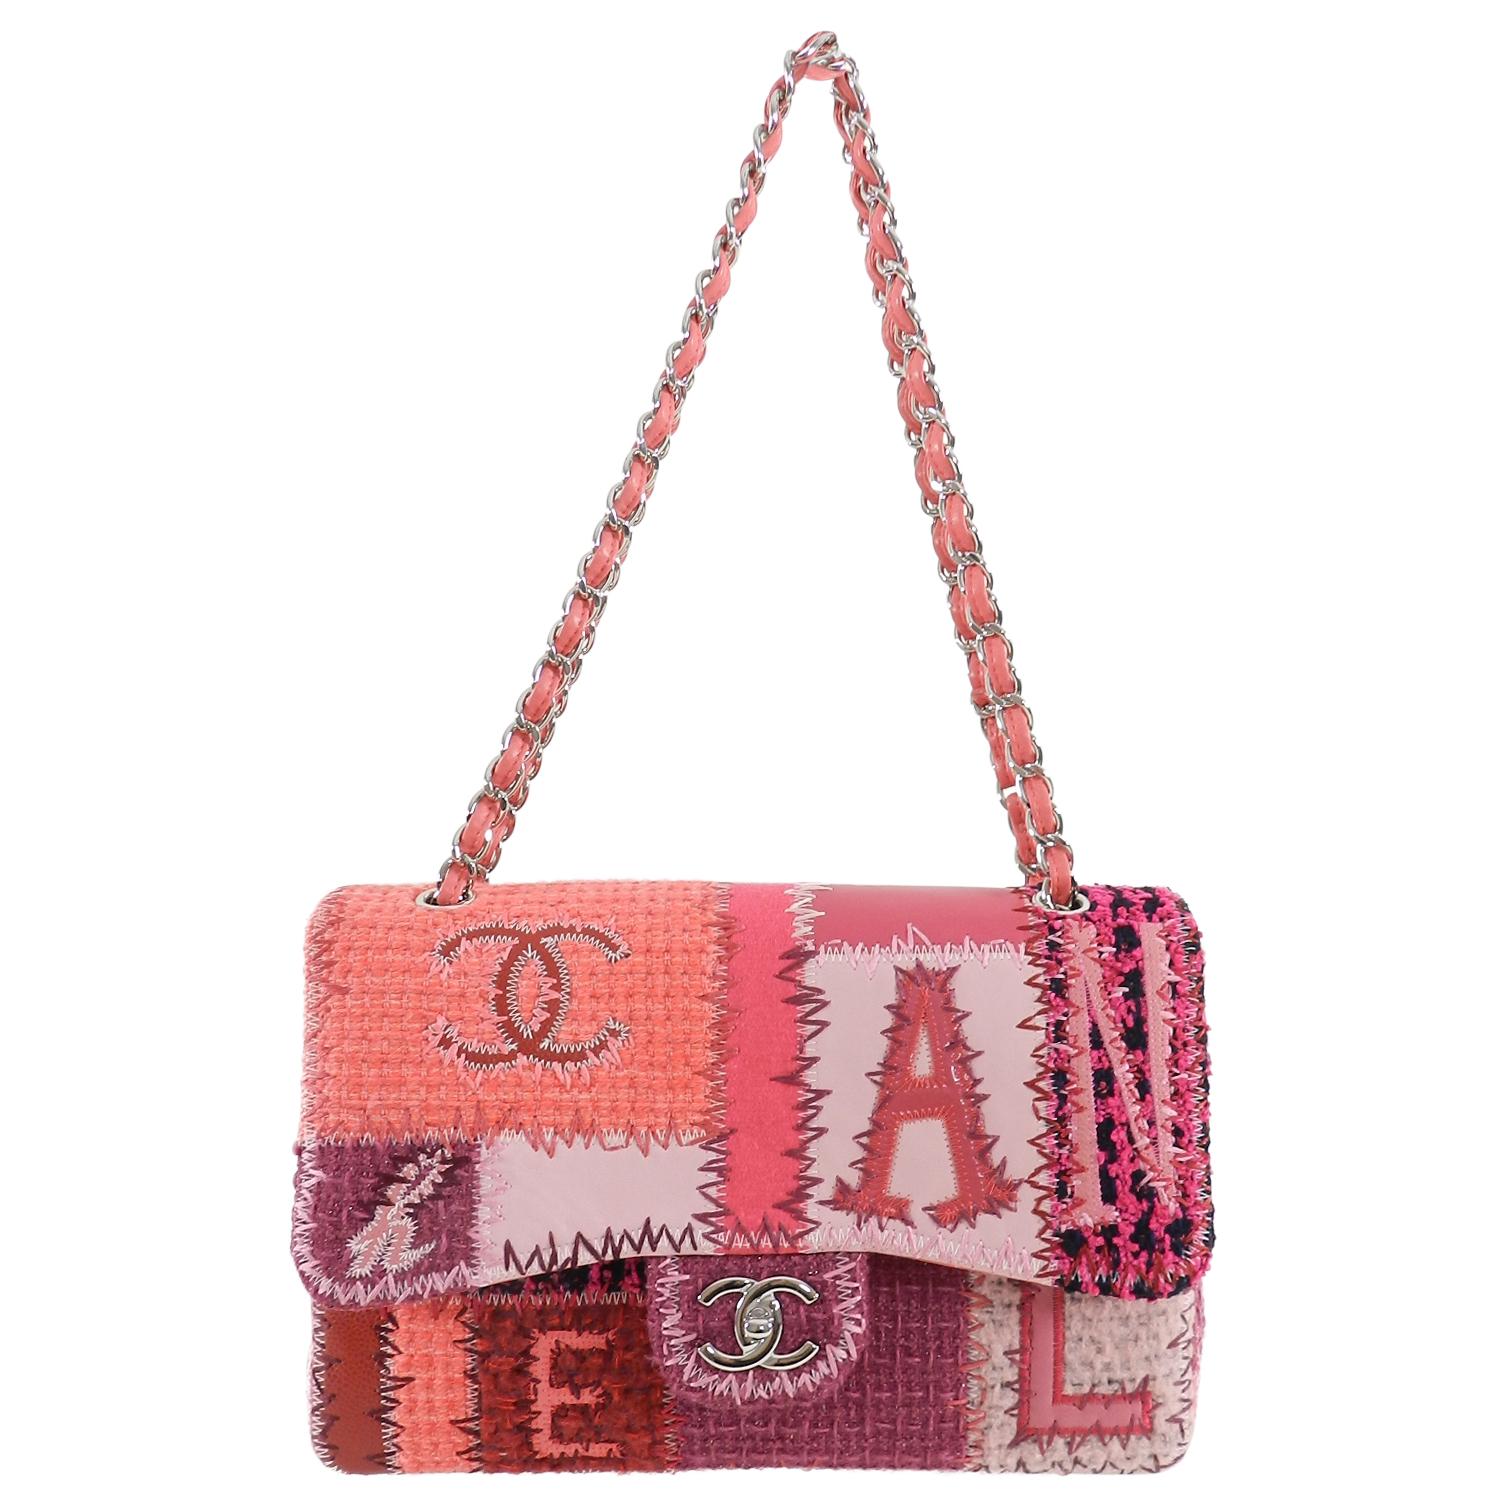 Chanel Pink Tweed Patchwork Coco Chanel Jumbo Flap Bag.  Silvertone metal hardware, hot bubblegum pink, red, fuchsia, tones with patchwork tweed, caviar leather, etc... Patchwork 